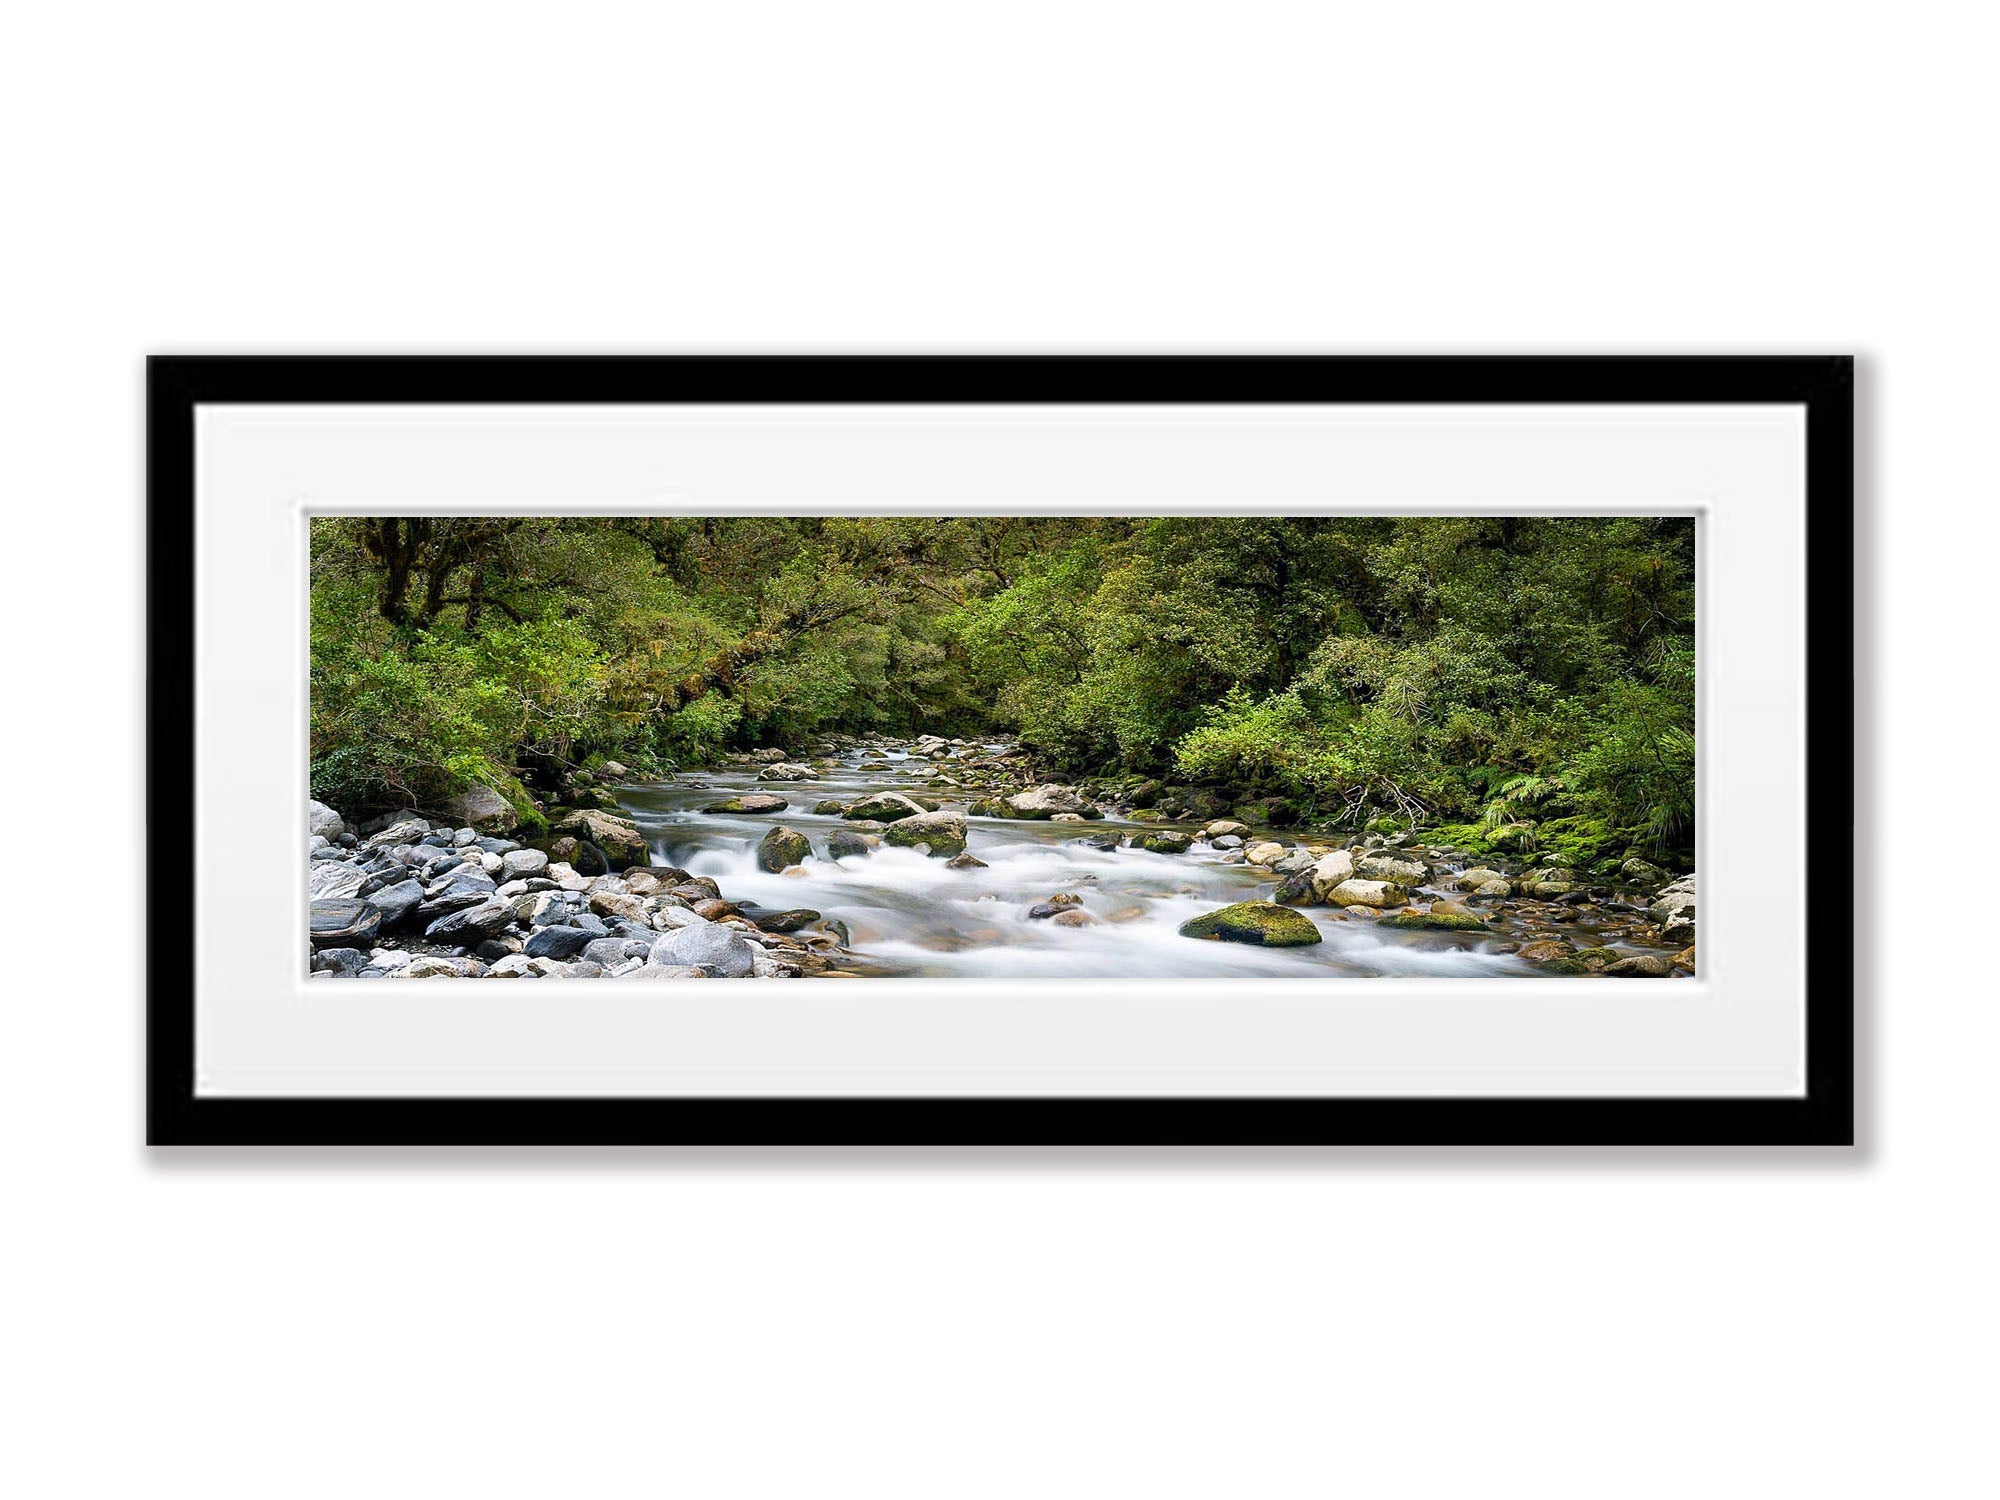 The Arthur River, Milford Track - New Zealand